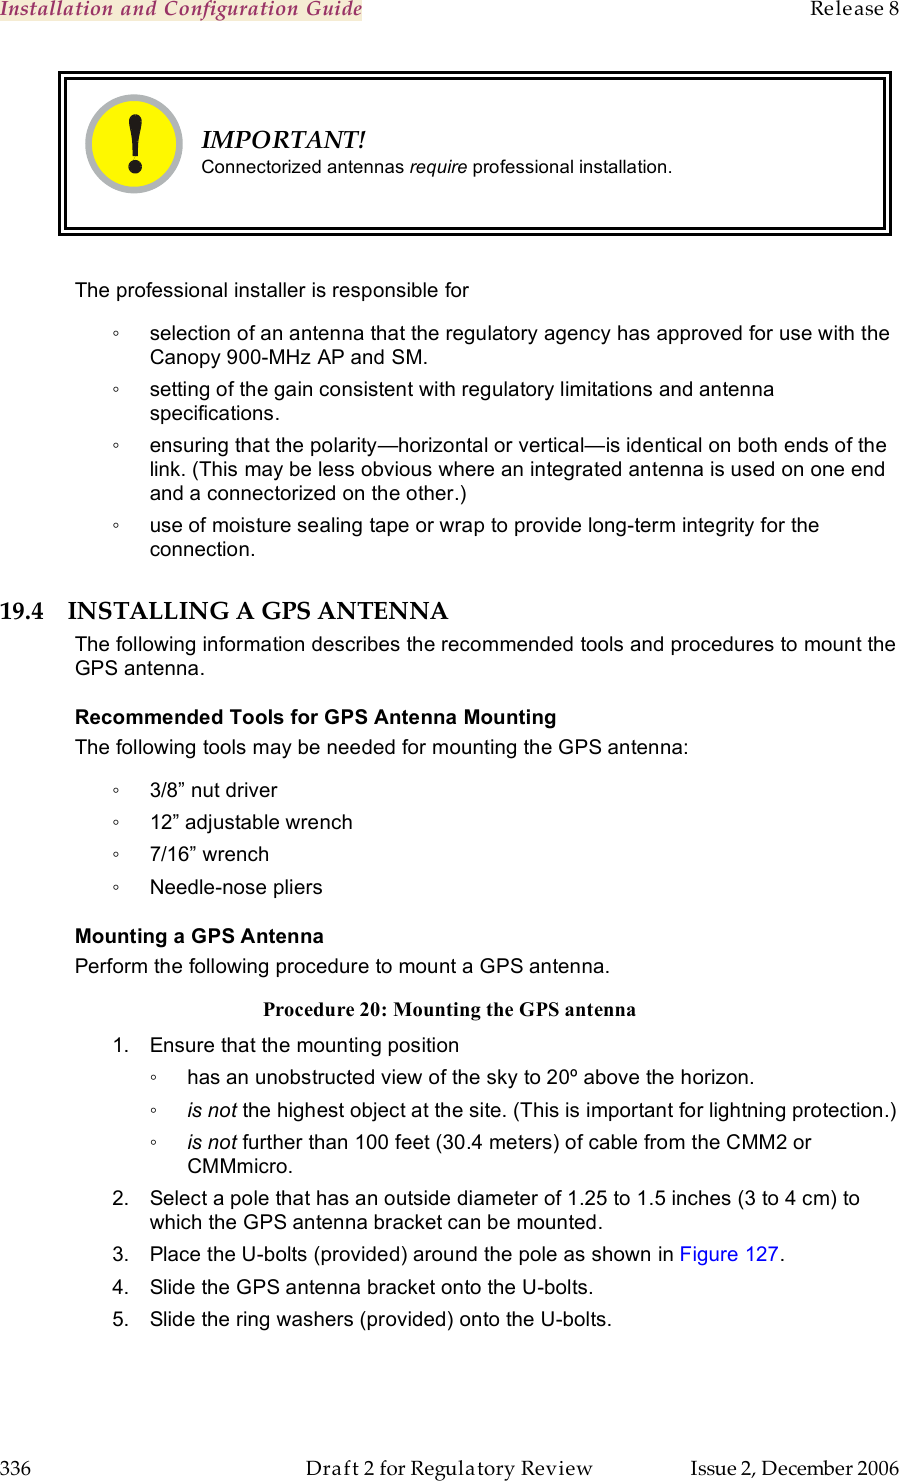 Installation and Configuration Guide    Release 8   336  Draft 2 for Regulatory Review  Issue 2, December 2006  IMPORTANT! Connectorized antennas require professional installation.  The professional installer is responsible for ◦  selection of an antenna that the regulatory agency has approved for use with the Canopy 900-MHz AP and SM. ◦  setting of the gain consistent with regulatory limitations and antenna specifications. ◦  ensuring that the polarity—horizontal or vertical—is identical on both ends of the link. (This may be less obvious where an integrated antenna is used on one end and a connectorized on the other.) ◦  use of moisture sealing tape or wrap to provide long-term integrity for the connection. 19.4 INSTALLING A GPS ANTENNA The following information describes the recommended tools and procedures to mount the GPS antenna. Recommended Tools for GPS Antenna Mounting The following tools may be needed for mounting the GPS antenna: ◦  3/8” nut driver ◦  12” adjustable wrench ◦  7/16” wrench ◦  Needle-nose pliers Mounting a GPS Antenna Perform the following procedure to mount a GPS antenna. Procedure 20: Mounting the GPS antenna 1.  Ensure that the mounting position ◦  has an unobstructed view of the sky to 20º above the horizon. ◦ is not the highest object at the site. (This is important for lightning protection.) ◦ is not further than 100 feet (30.4 meters) of cable from the CMM2 or CMMmicro. 2.  Select a pole that has an outside diameter of 1.25 to 1.5 inches (3 to 4 cm) to which the GPS antenna bracket can be mounted. 3.  Place the U-bolts (provided) around the pole as shown in Figure 127. 4.  Slide the GPS antenna bracket onto the U-bolts. 5.  Slide the ring washers (provided) onto the U-bolts. 